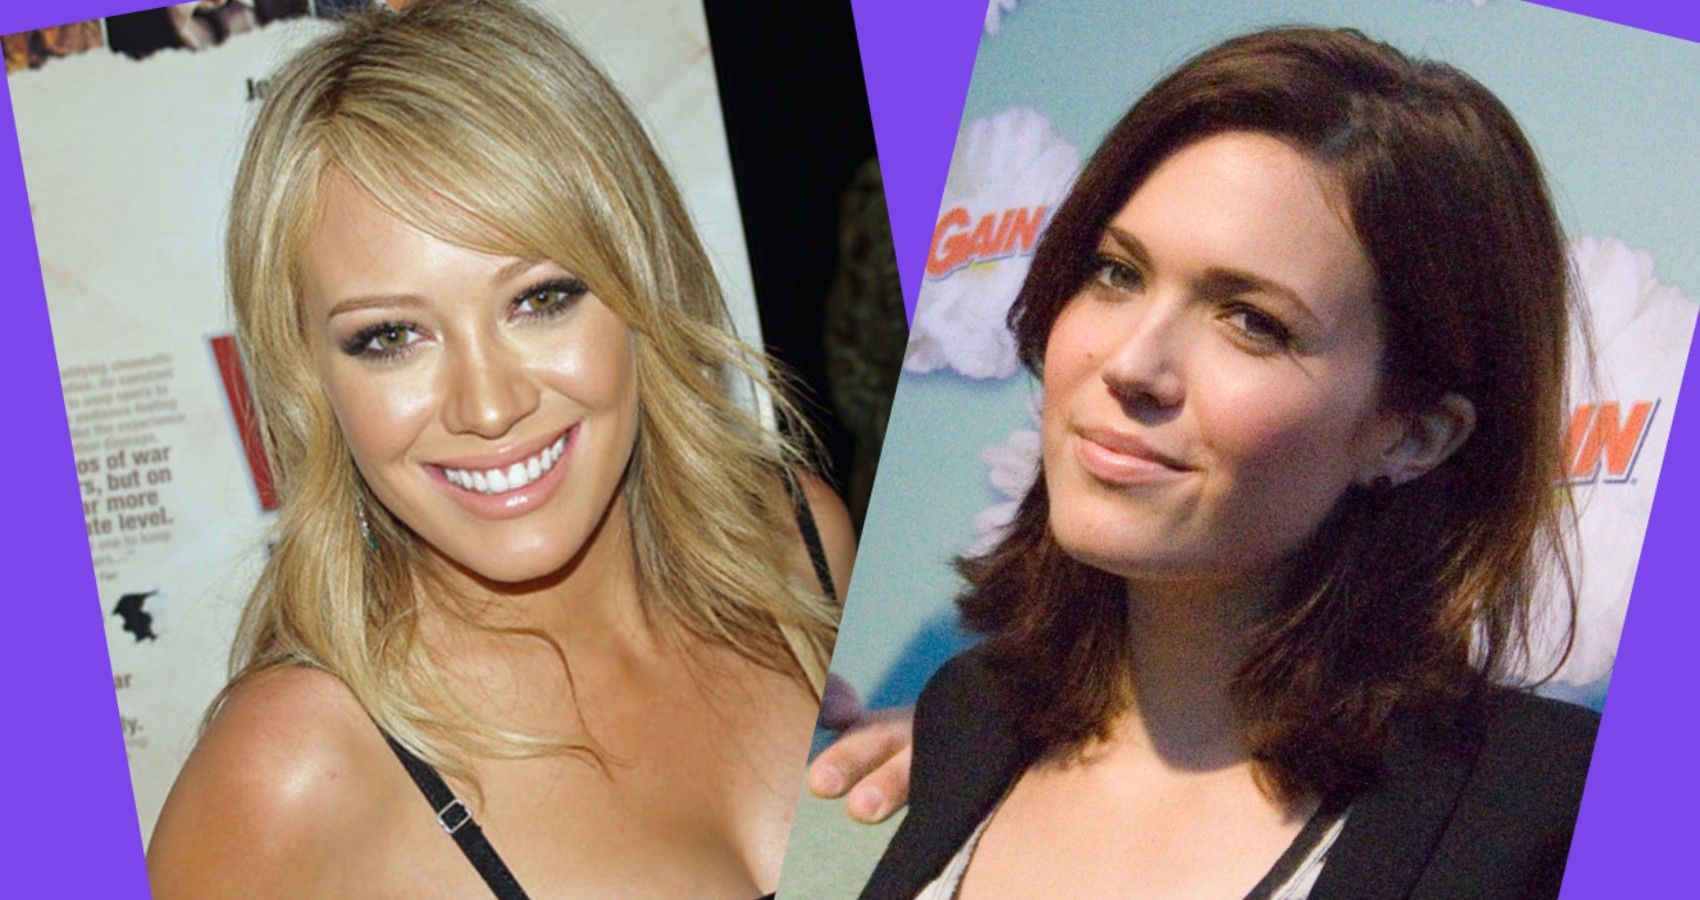 A collage picture of Hilary Duff and Mandy Moore